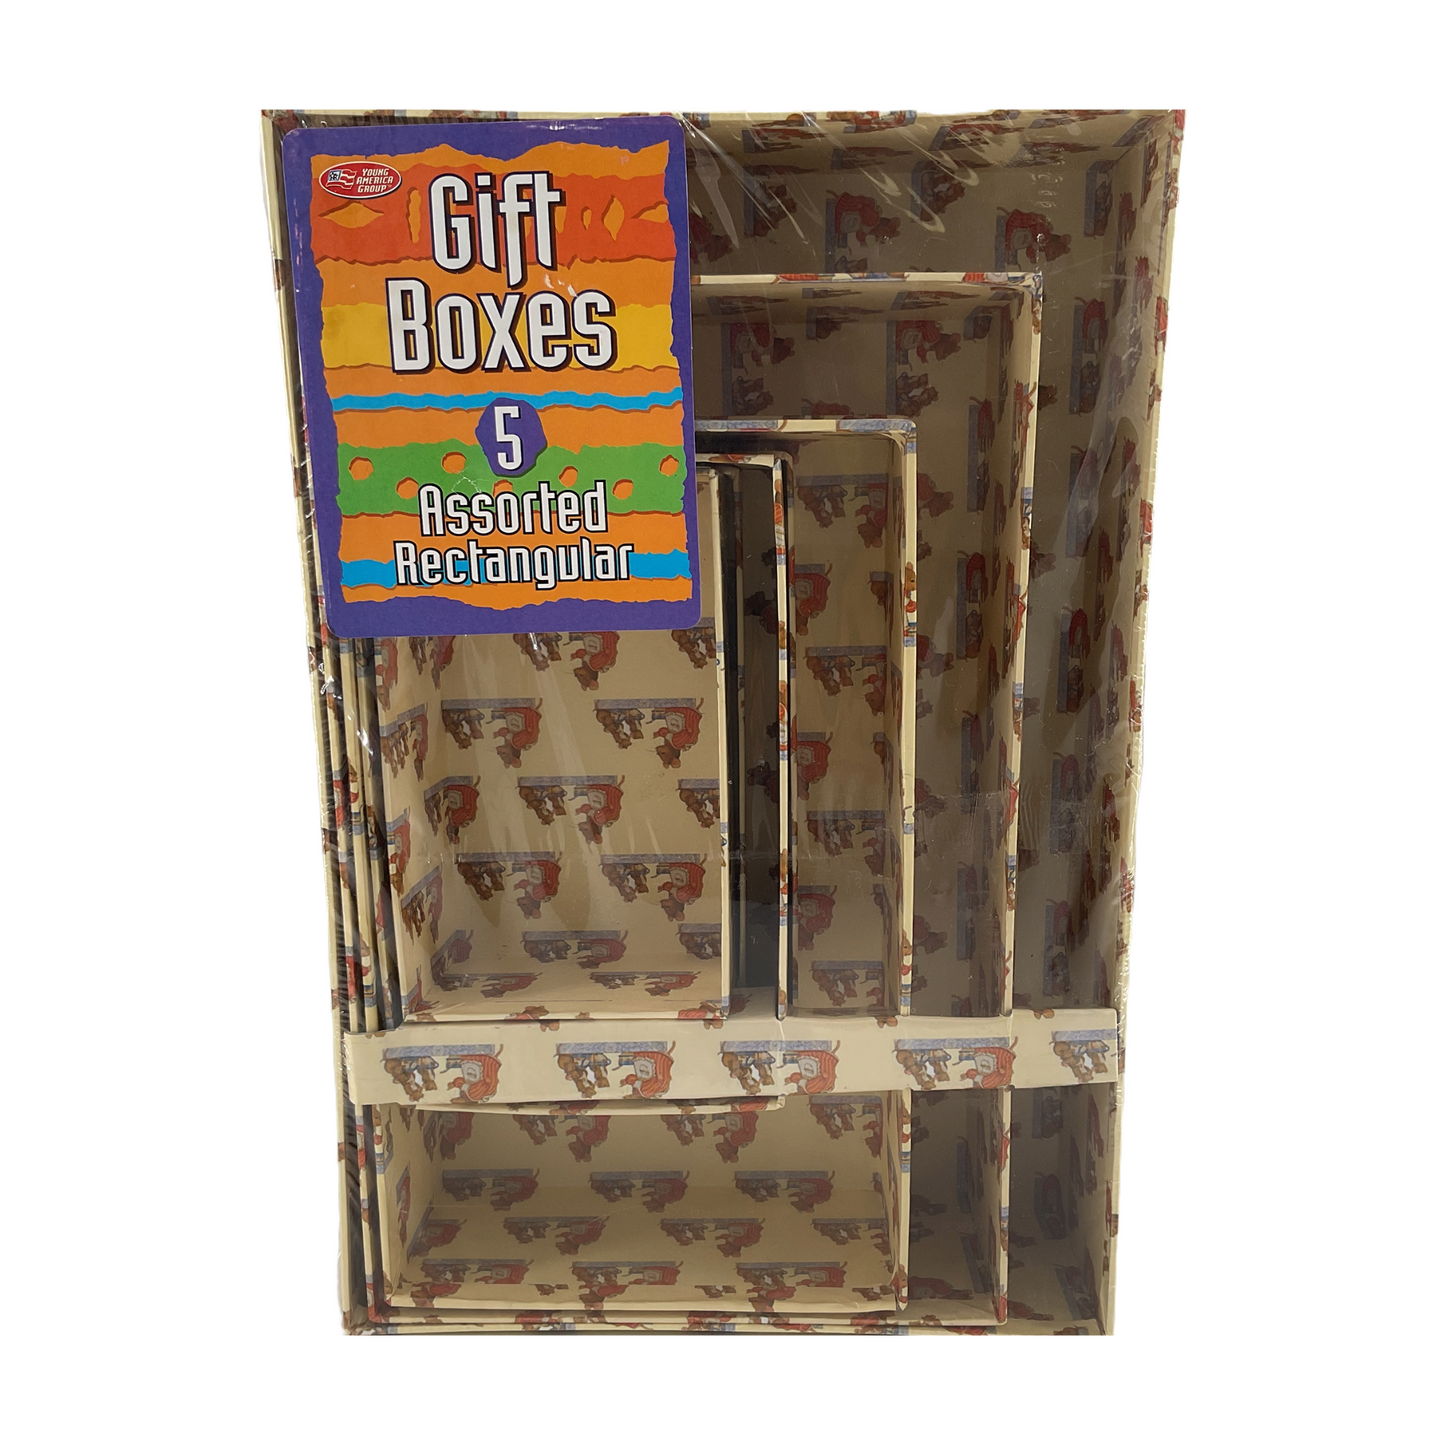 Gift Boxes 5 Assorted Rectangular